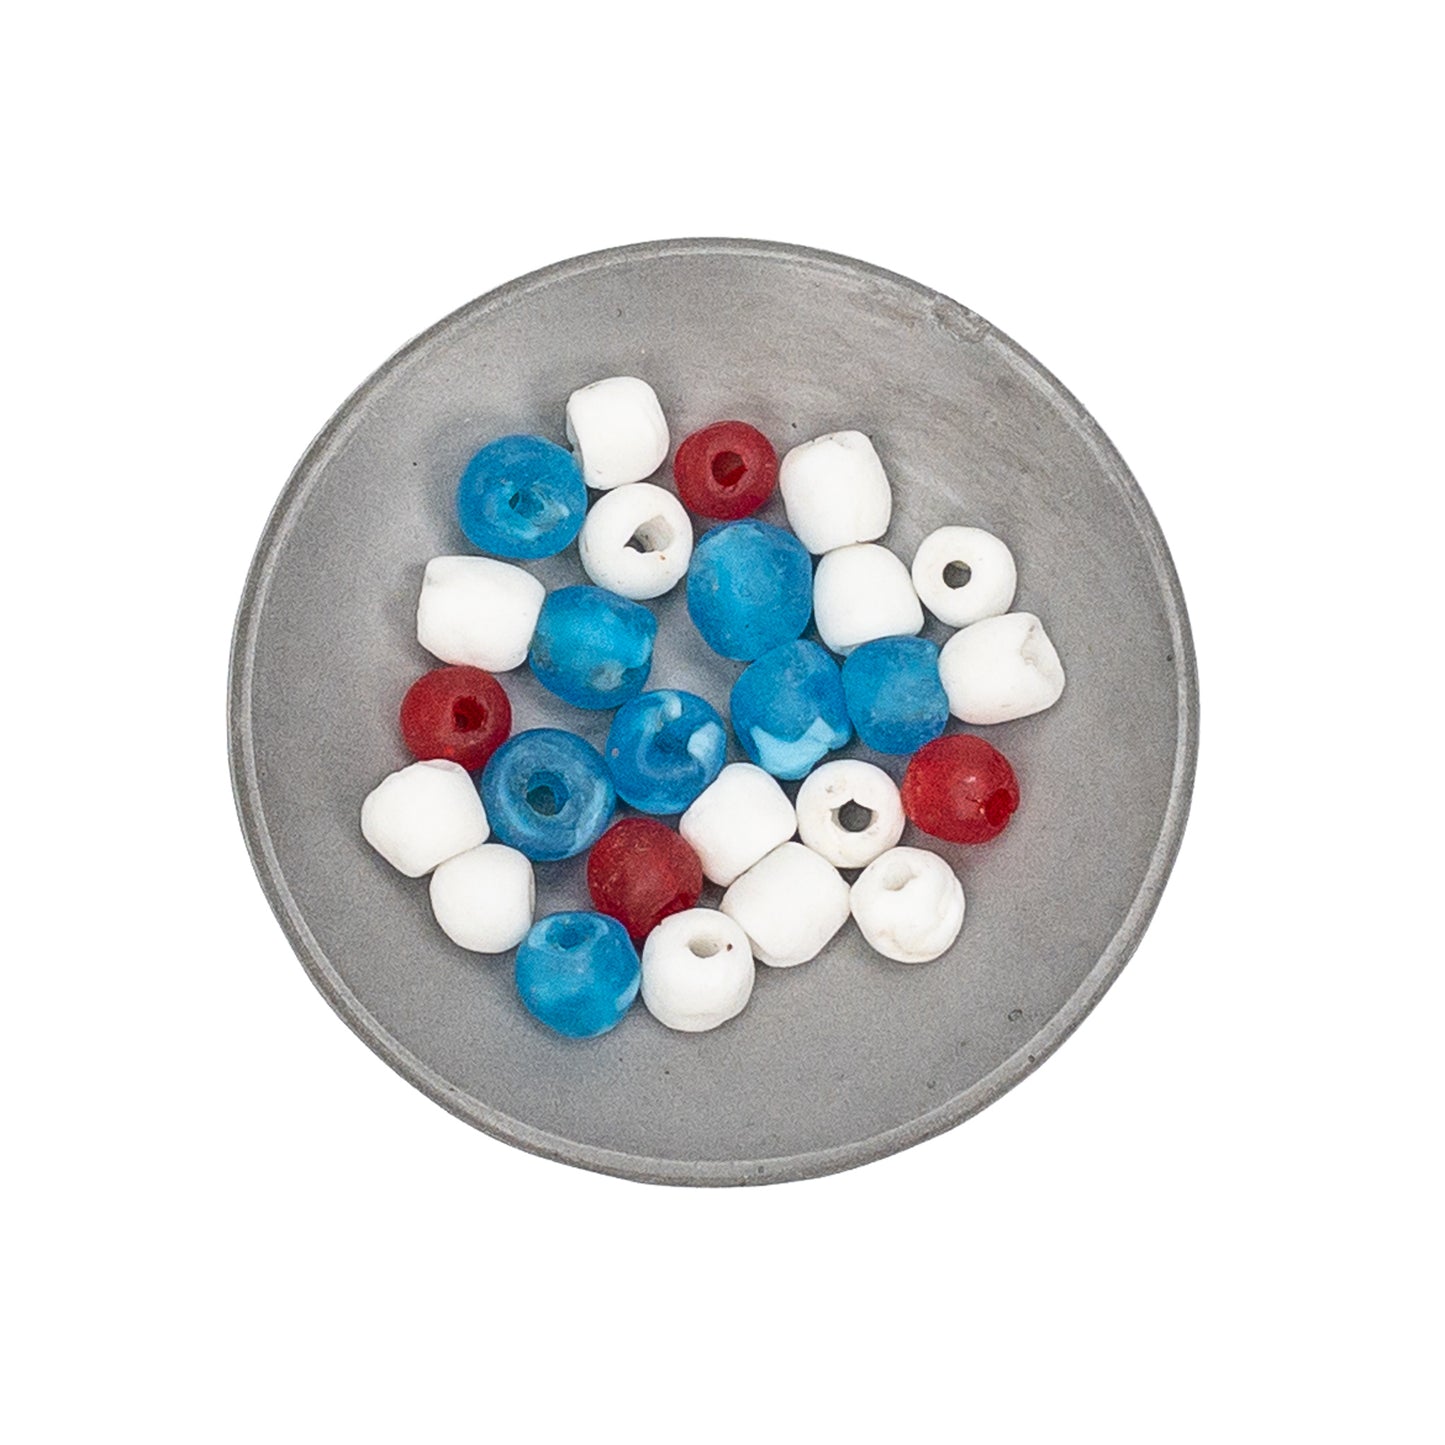 Liberty Rustic African Recycled Glass Bead Mix - 26 pcs.